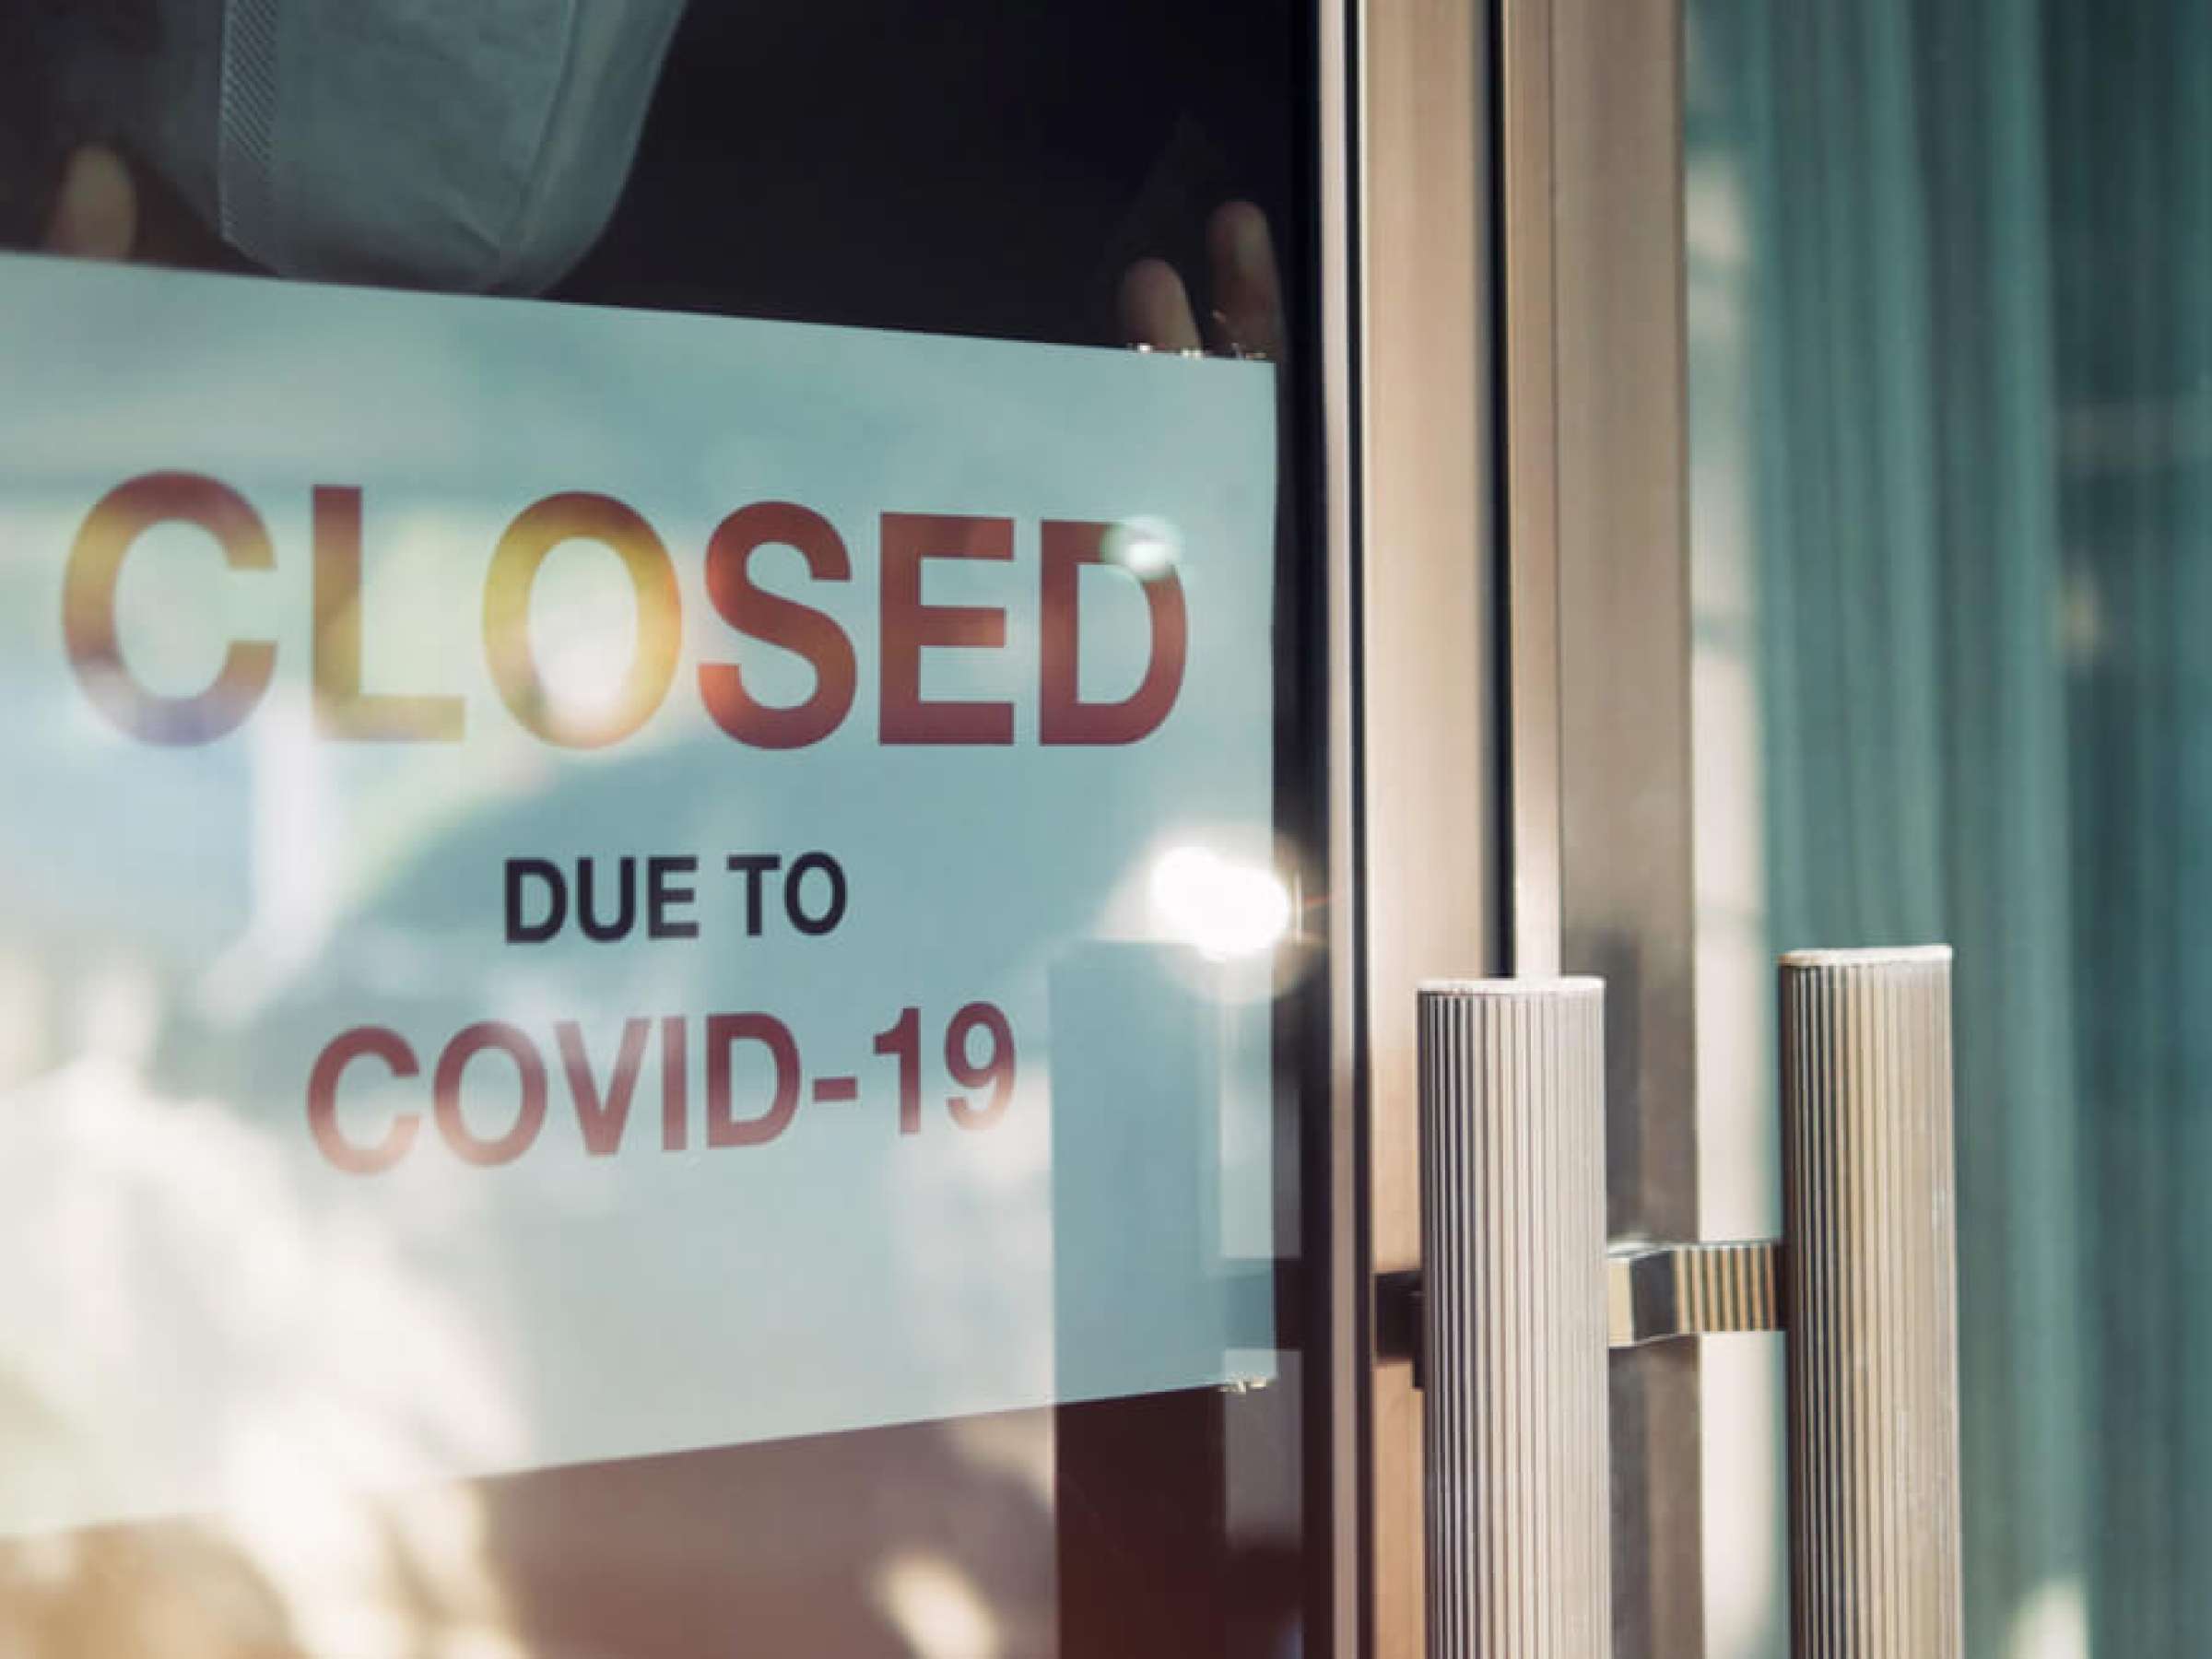 closed due to covid19